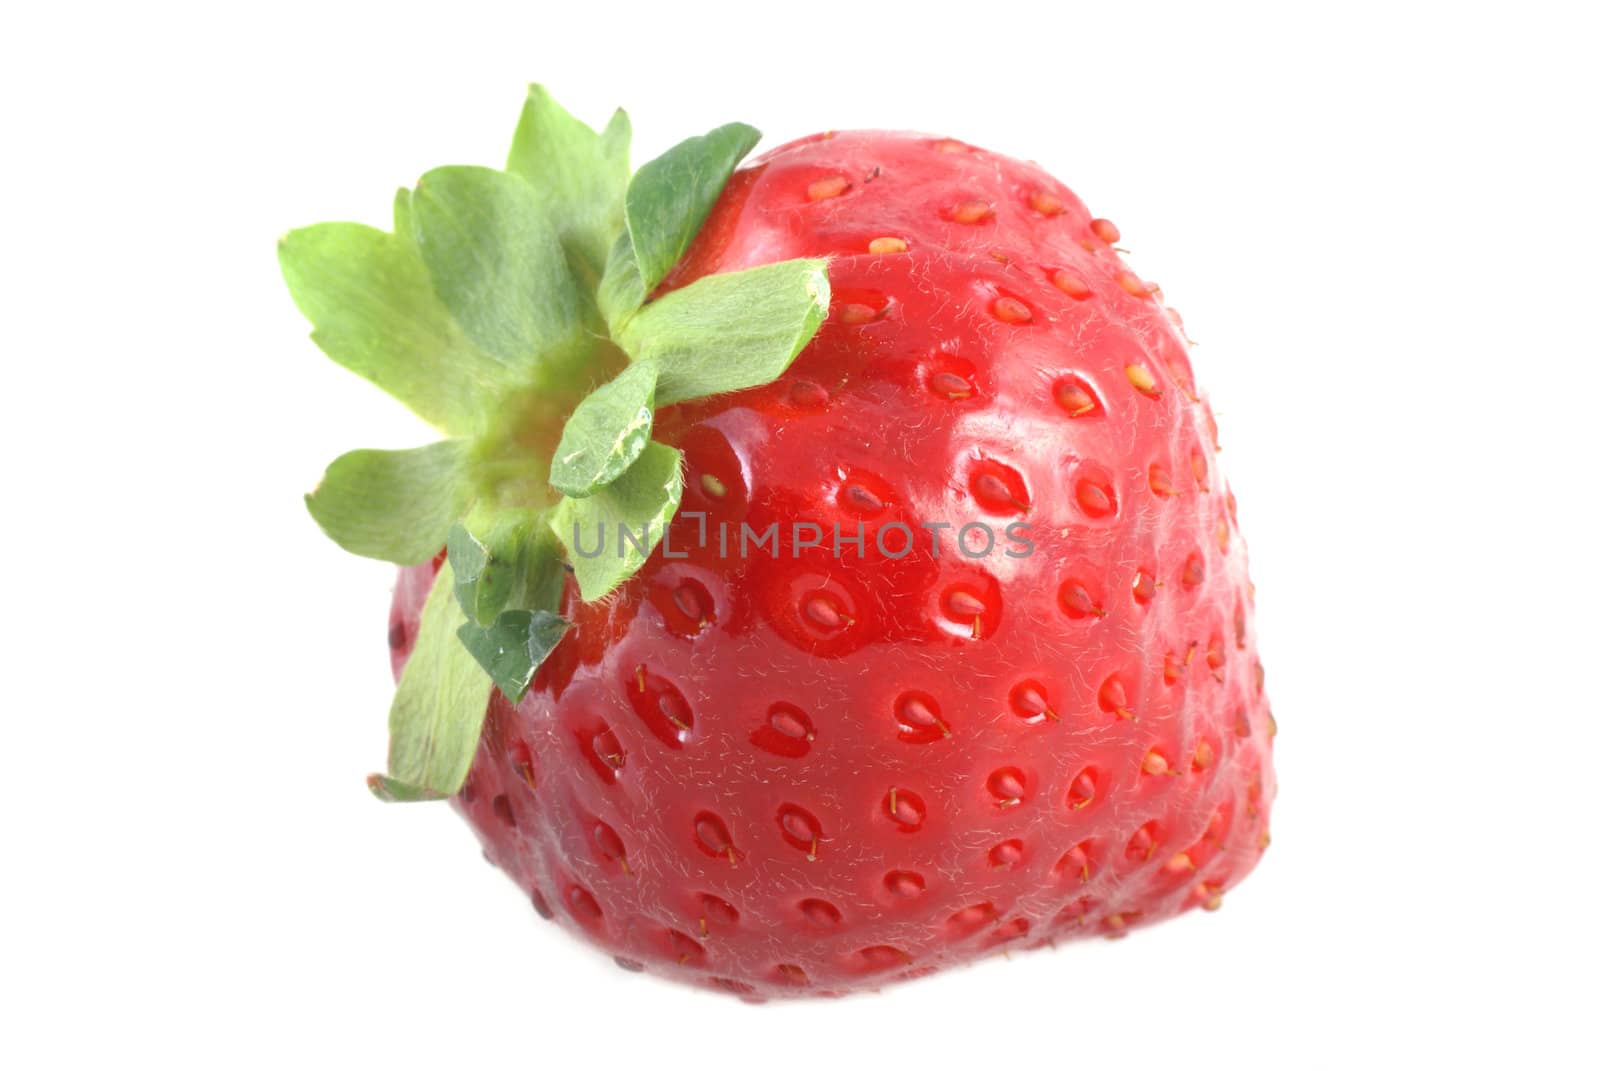 One colorful strawberry isolated on a white background.